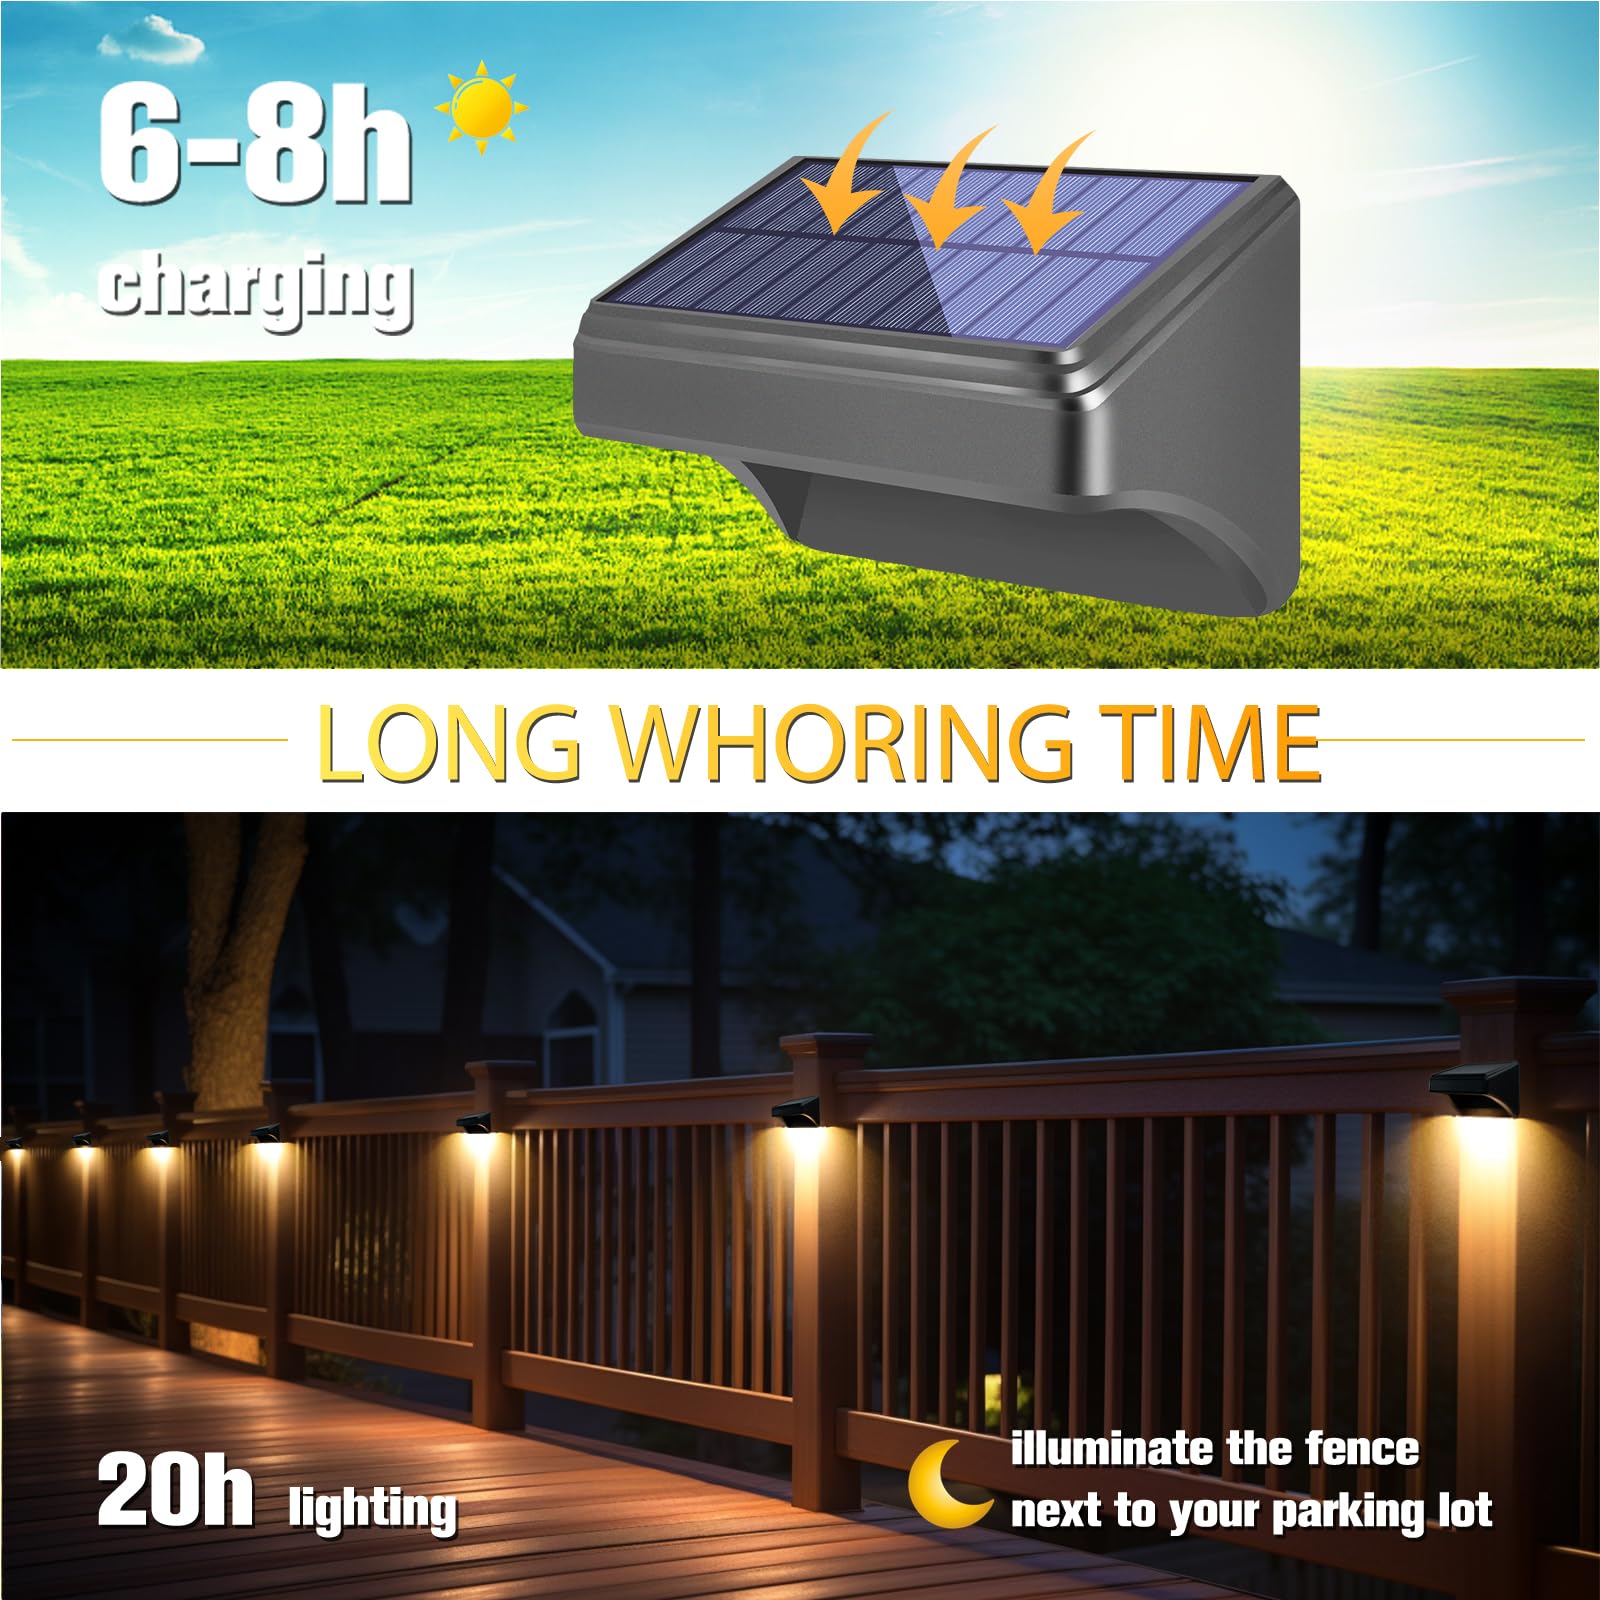 Solar Lights for Fence with 8 Solid Colors, Warm White Solar Wall Lights Outdoor Waterproof, Fence Lights Solar Powered, Outdoor Decor Accent ligths for Patio, Pool, Fence Line, Backyard. (8pack)